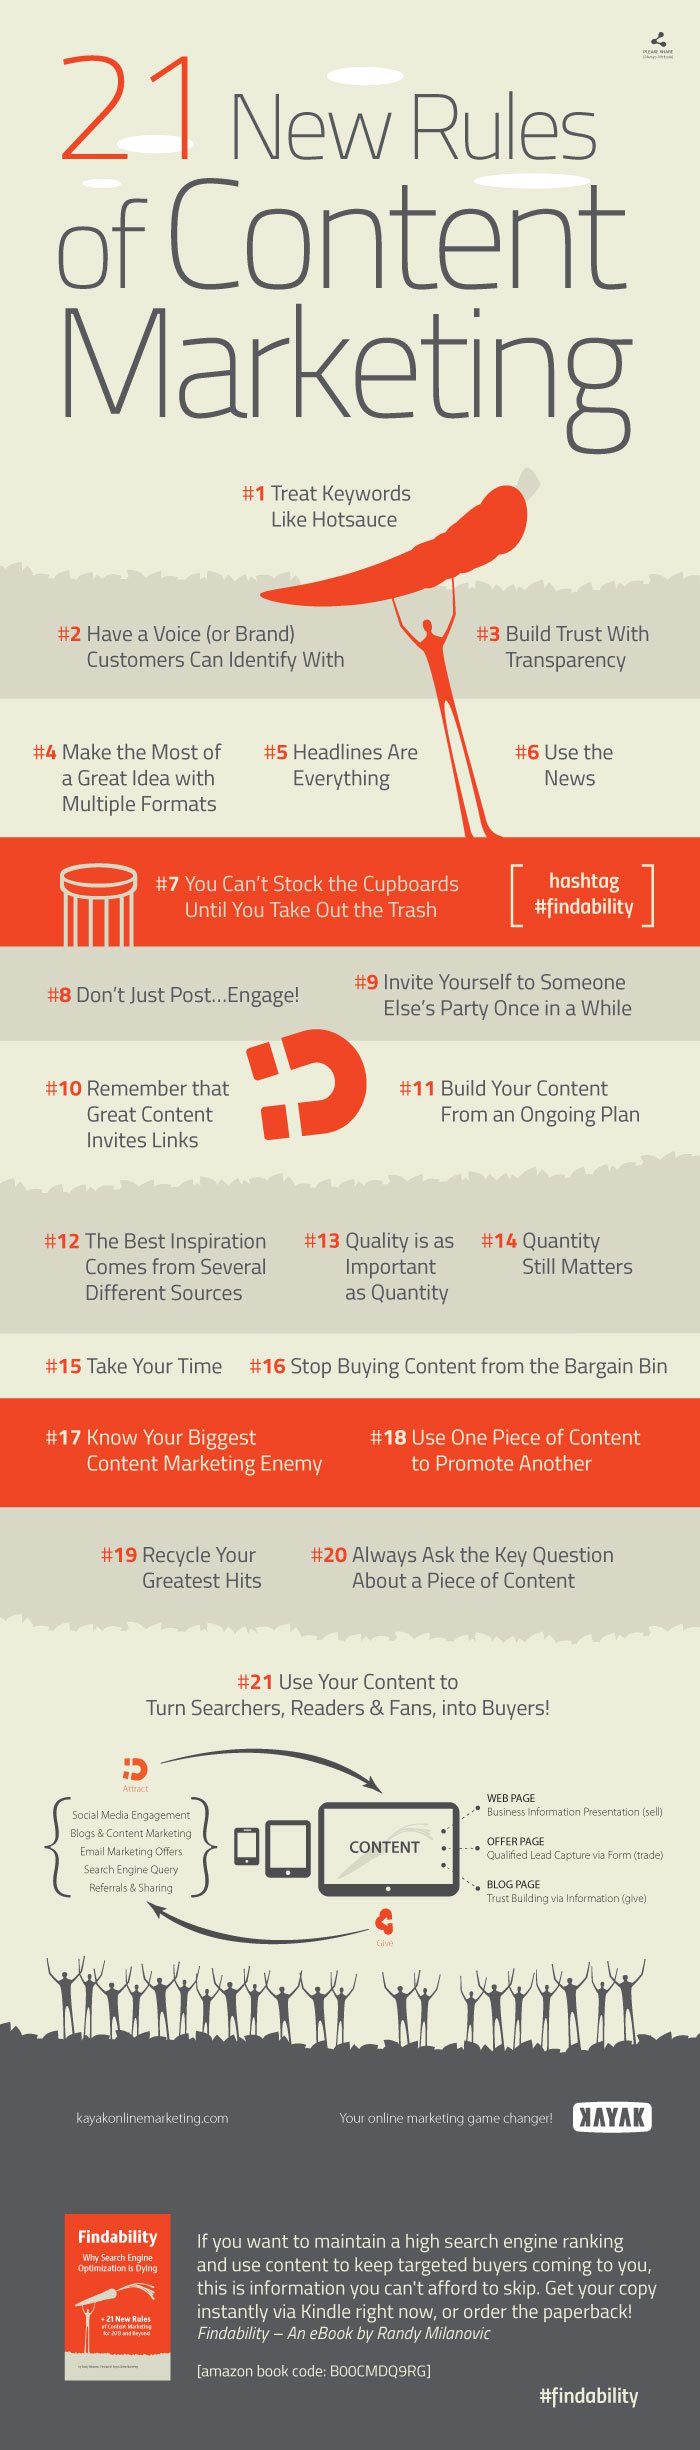 69 21 new rules of content marketing infographic